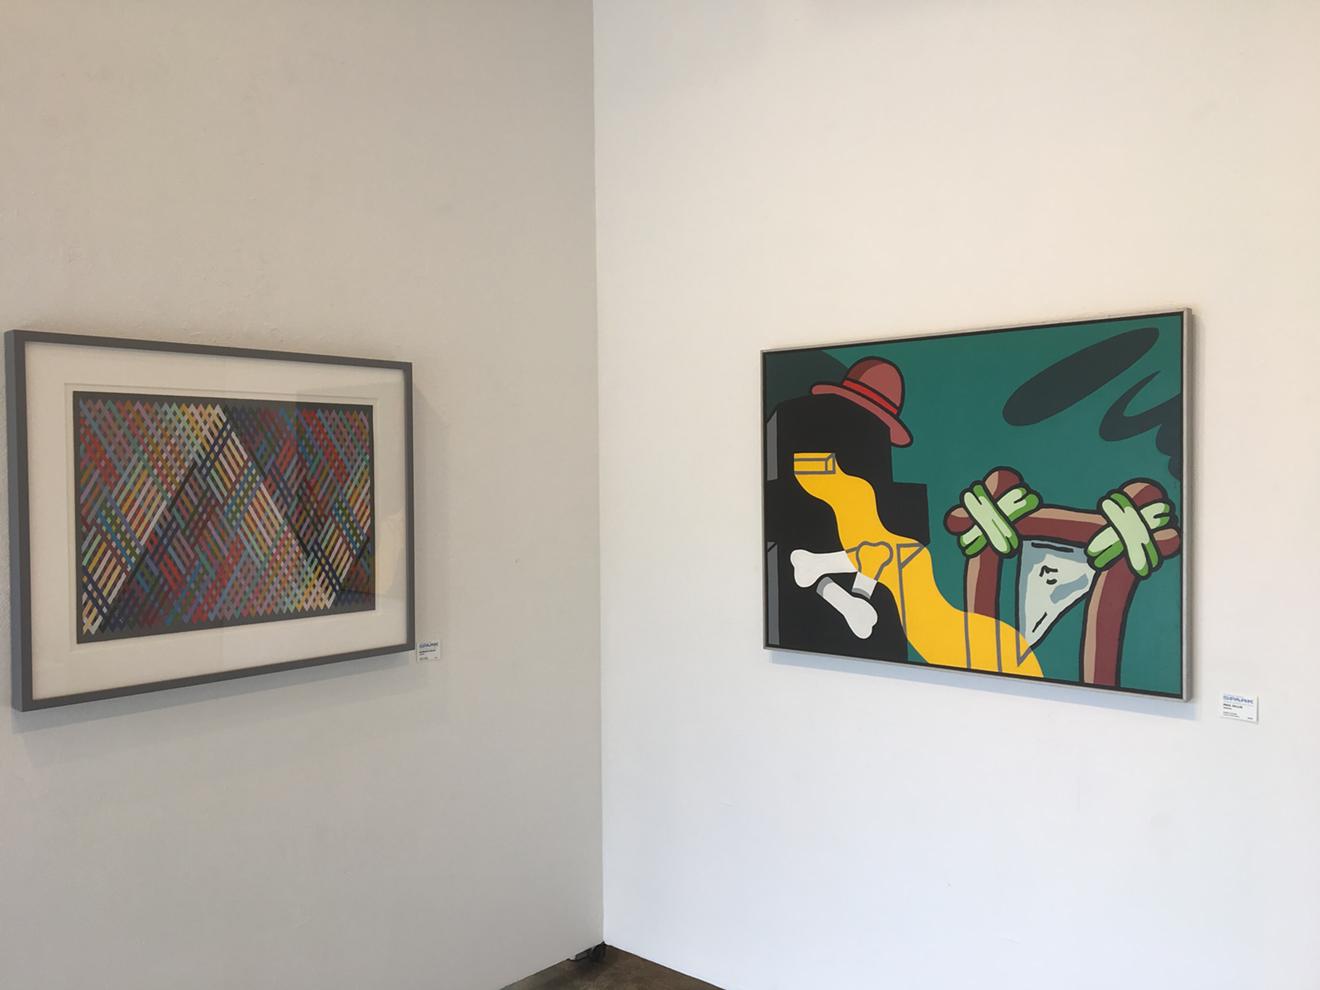 Works by Charlies DiJulio (left) and Paul Gillis at Spark Gallery.